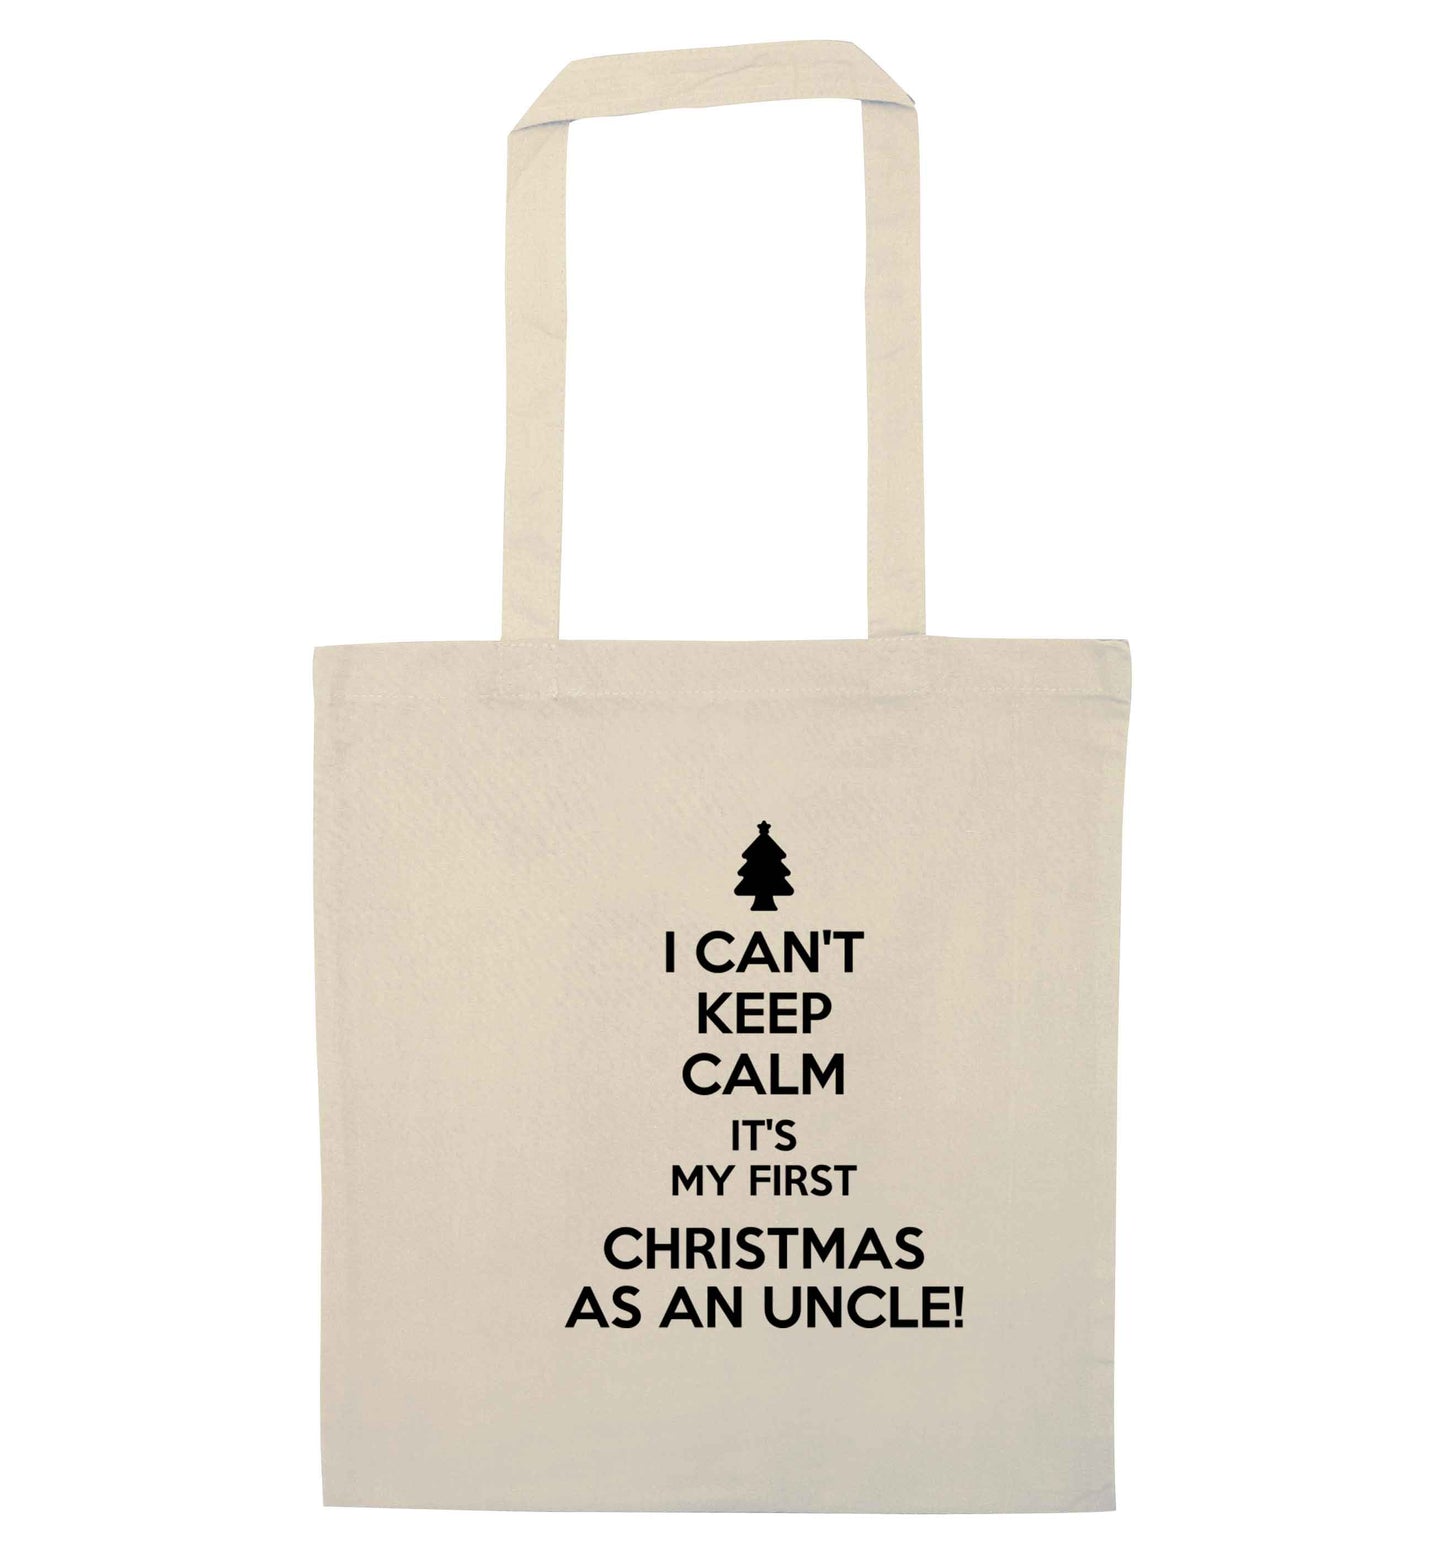 I can't keep calm it's my first Christmas as an uncle! natural tote bag